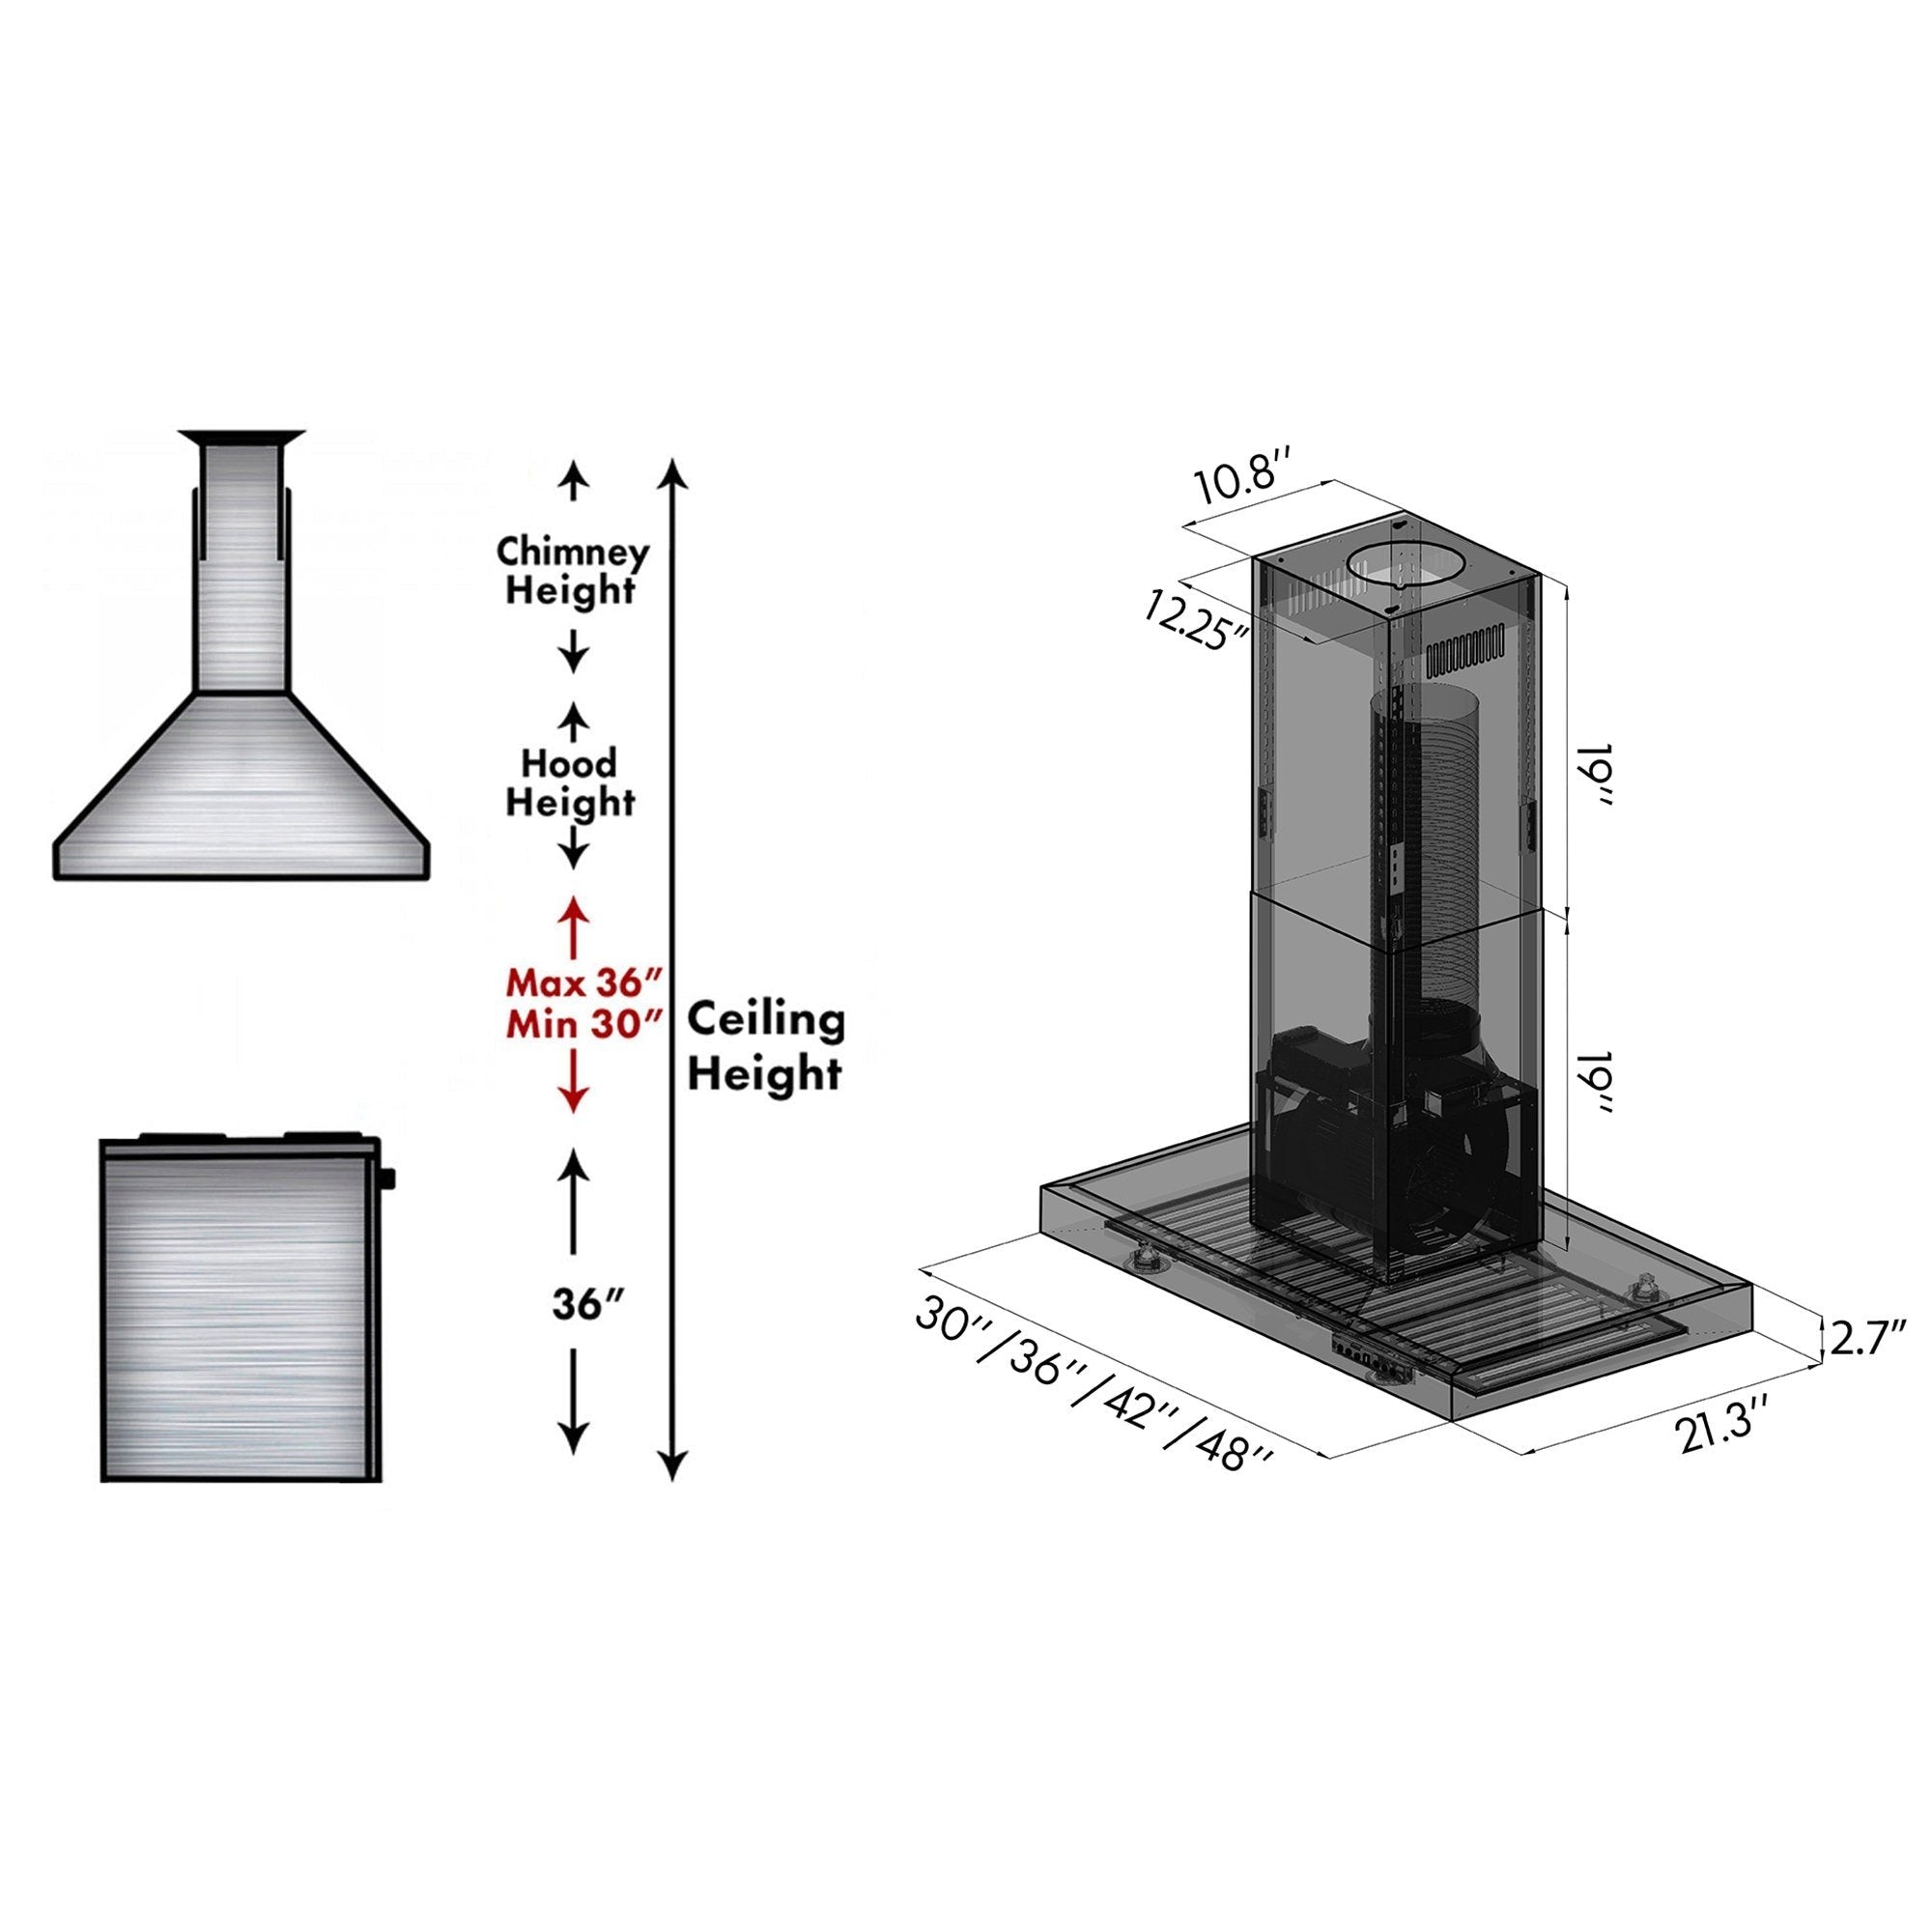 ZLINE Convertible Vent Island Mount Range Hood in Stainless Steel (KE2i) Dimensions and Chimney Height Guide